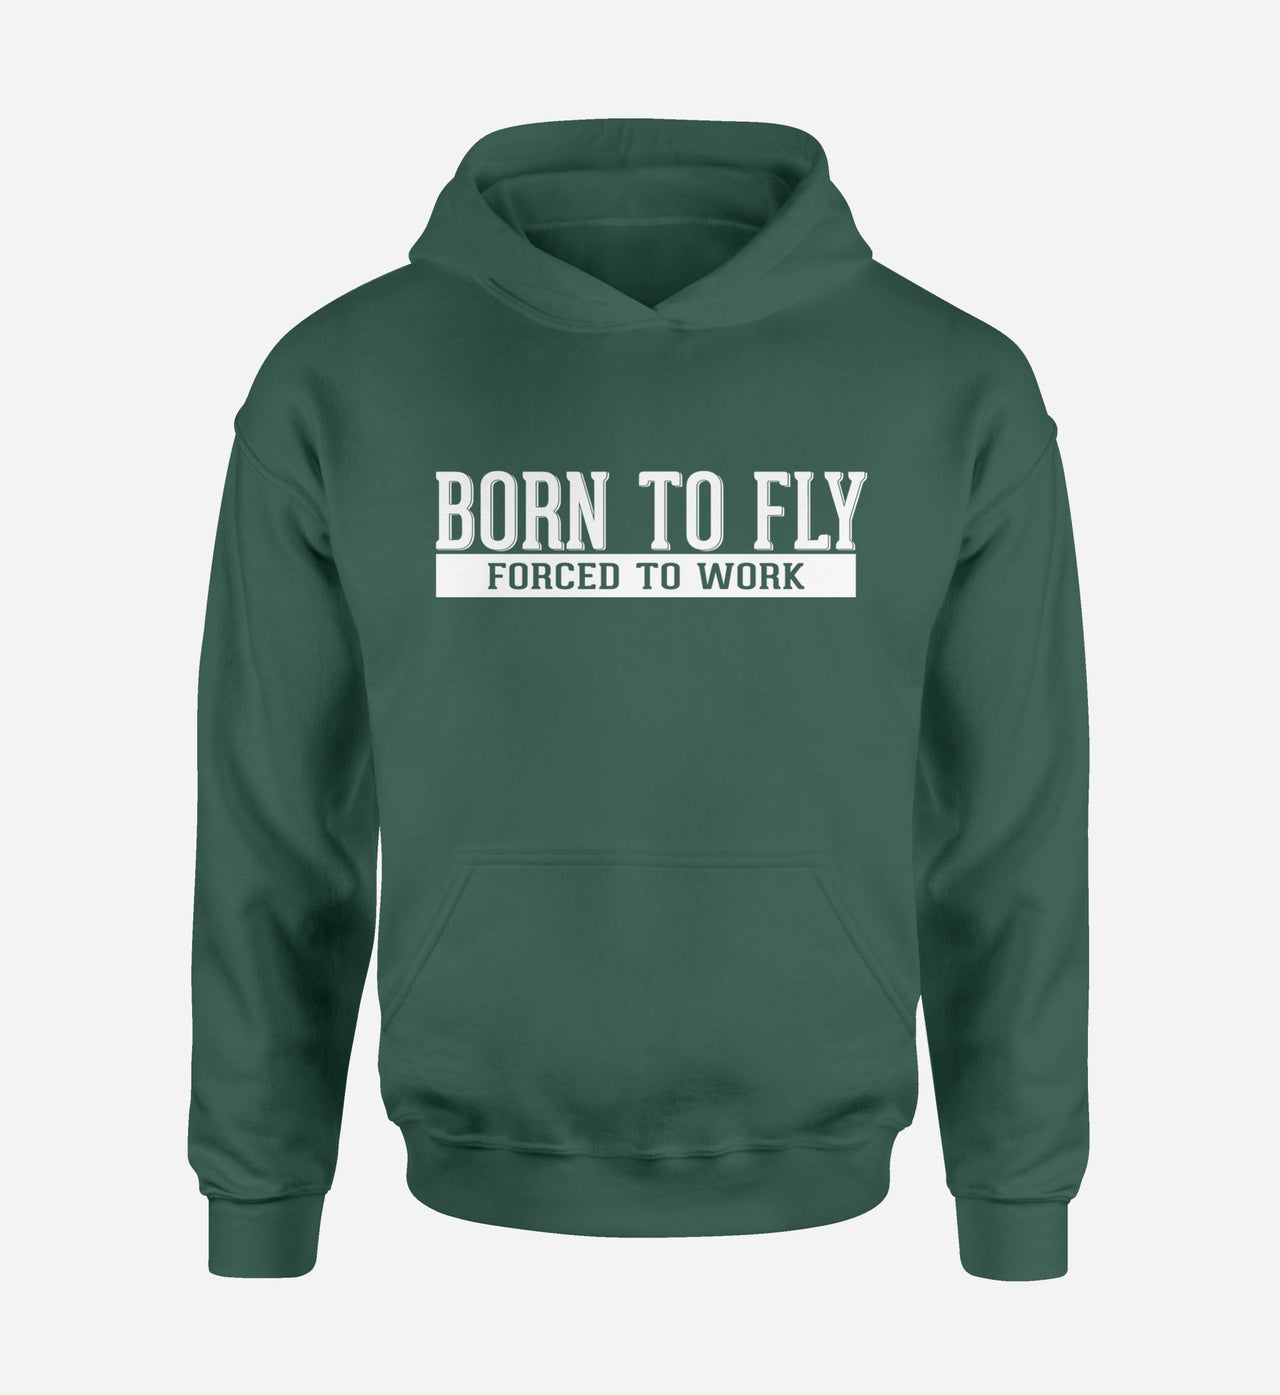 Born To Fly Forced To Work Designed Hoodies